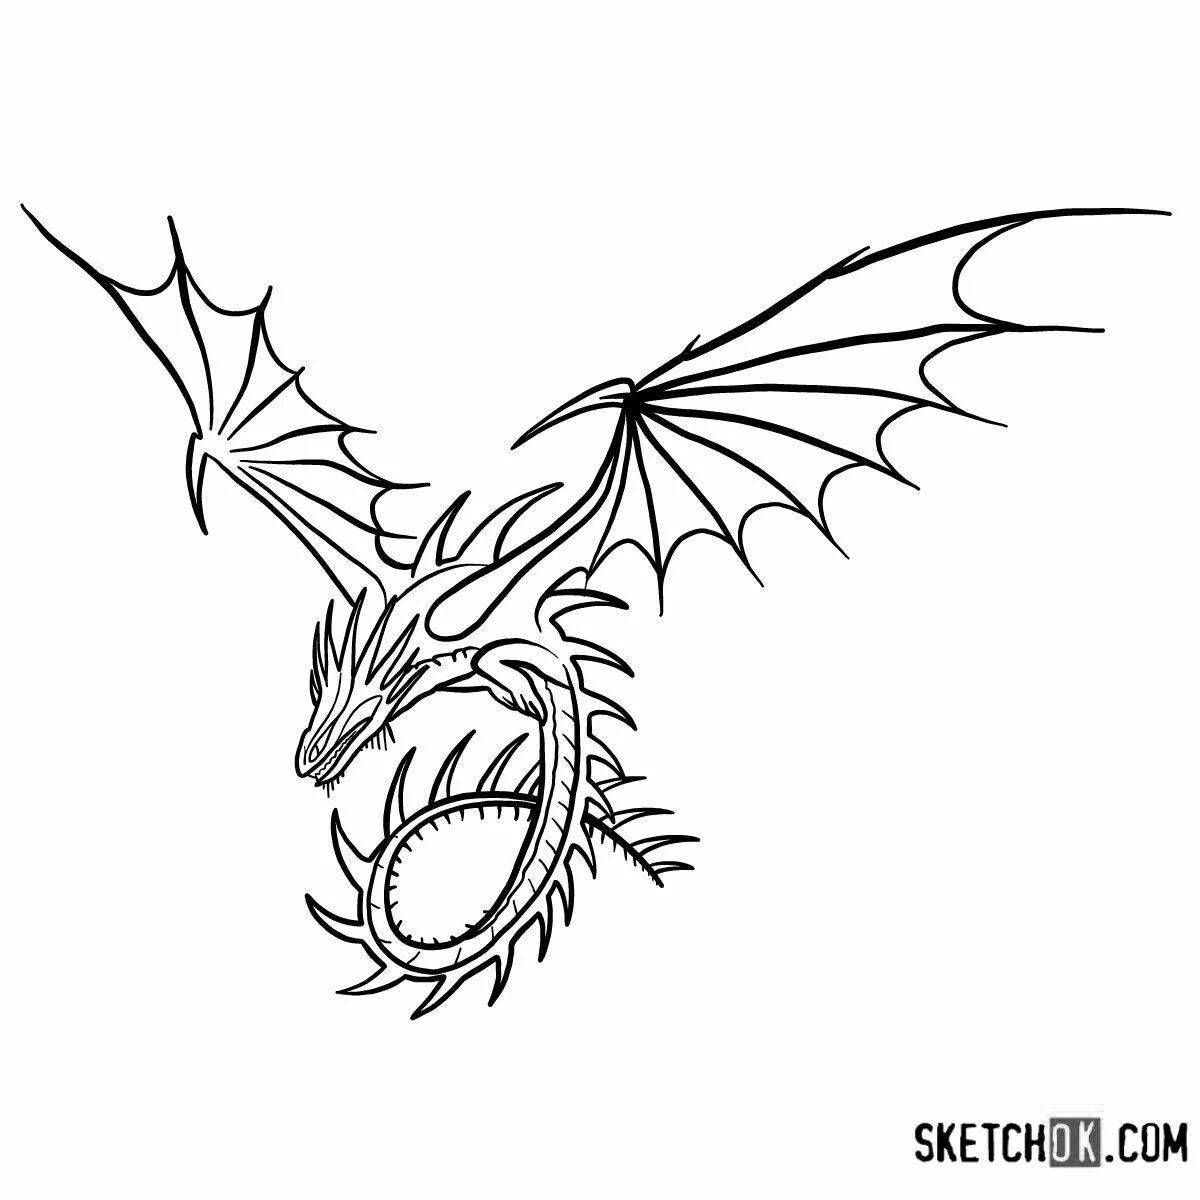 Chilling death whisper coloring page